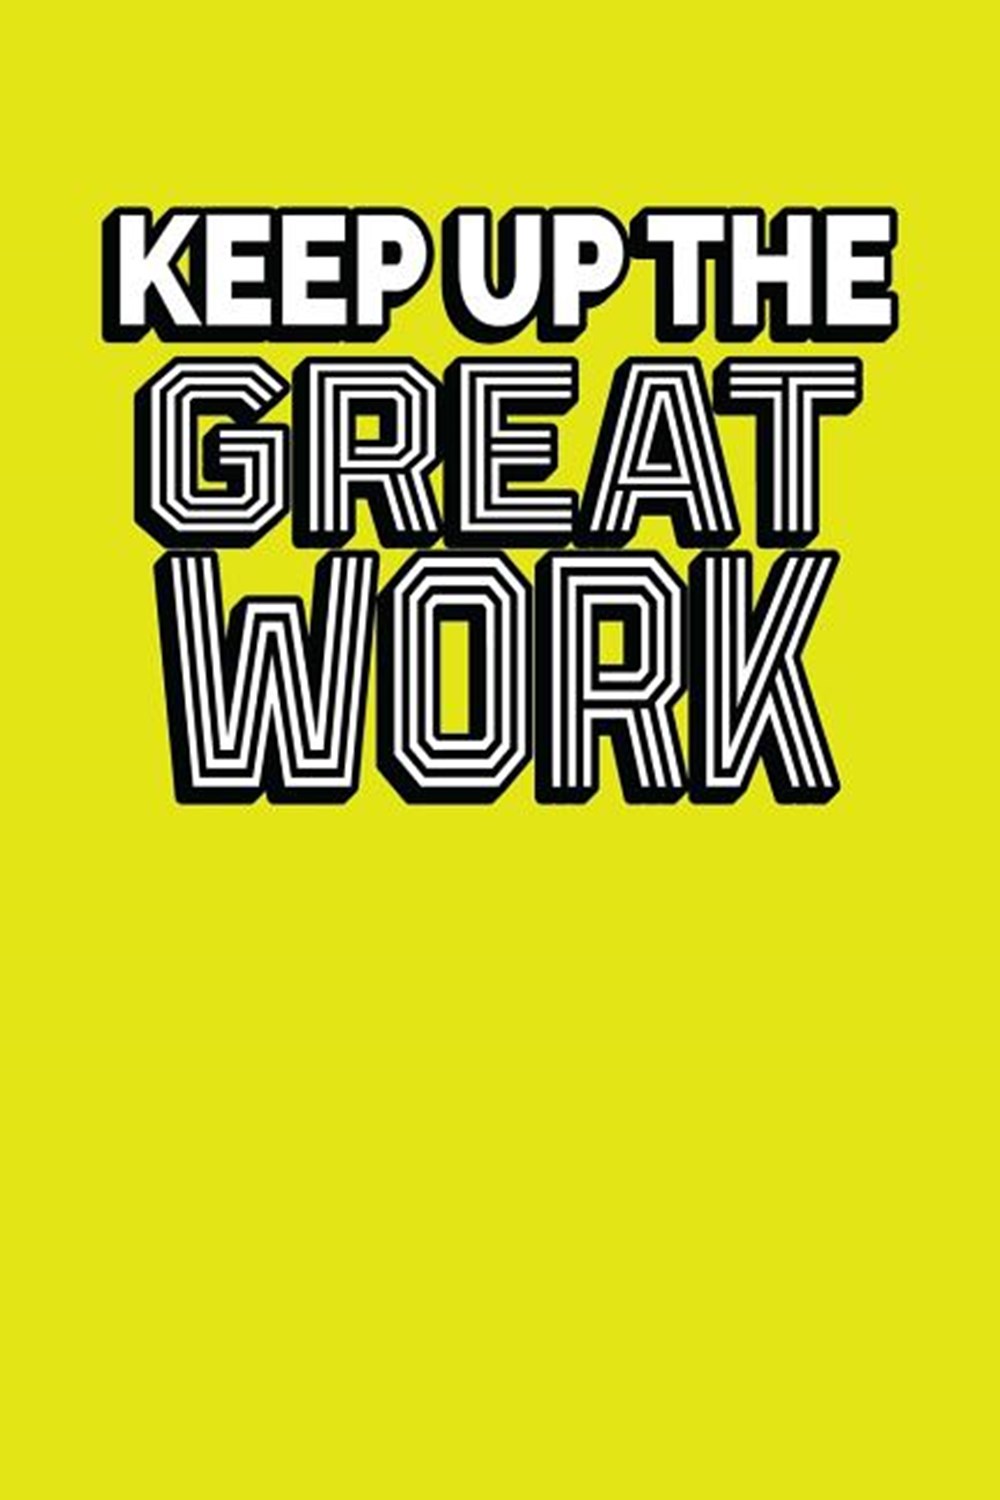 keep up the great work images